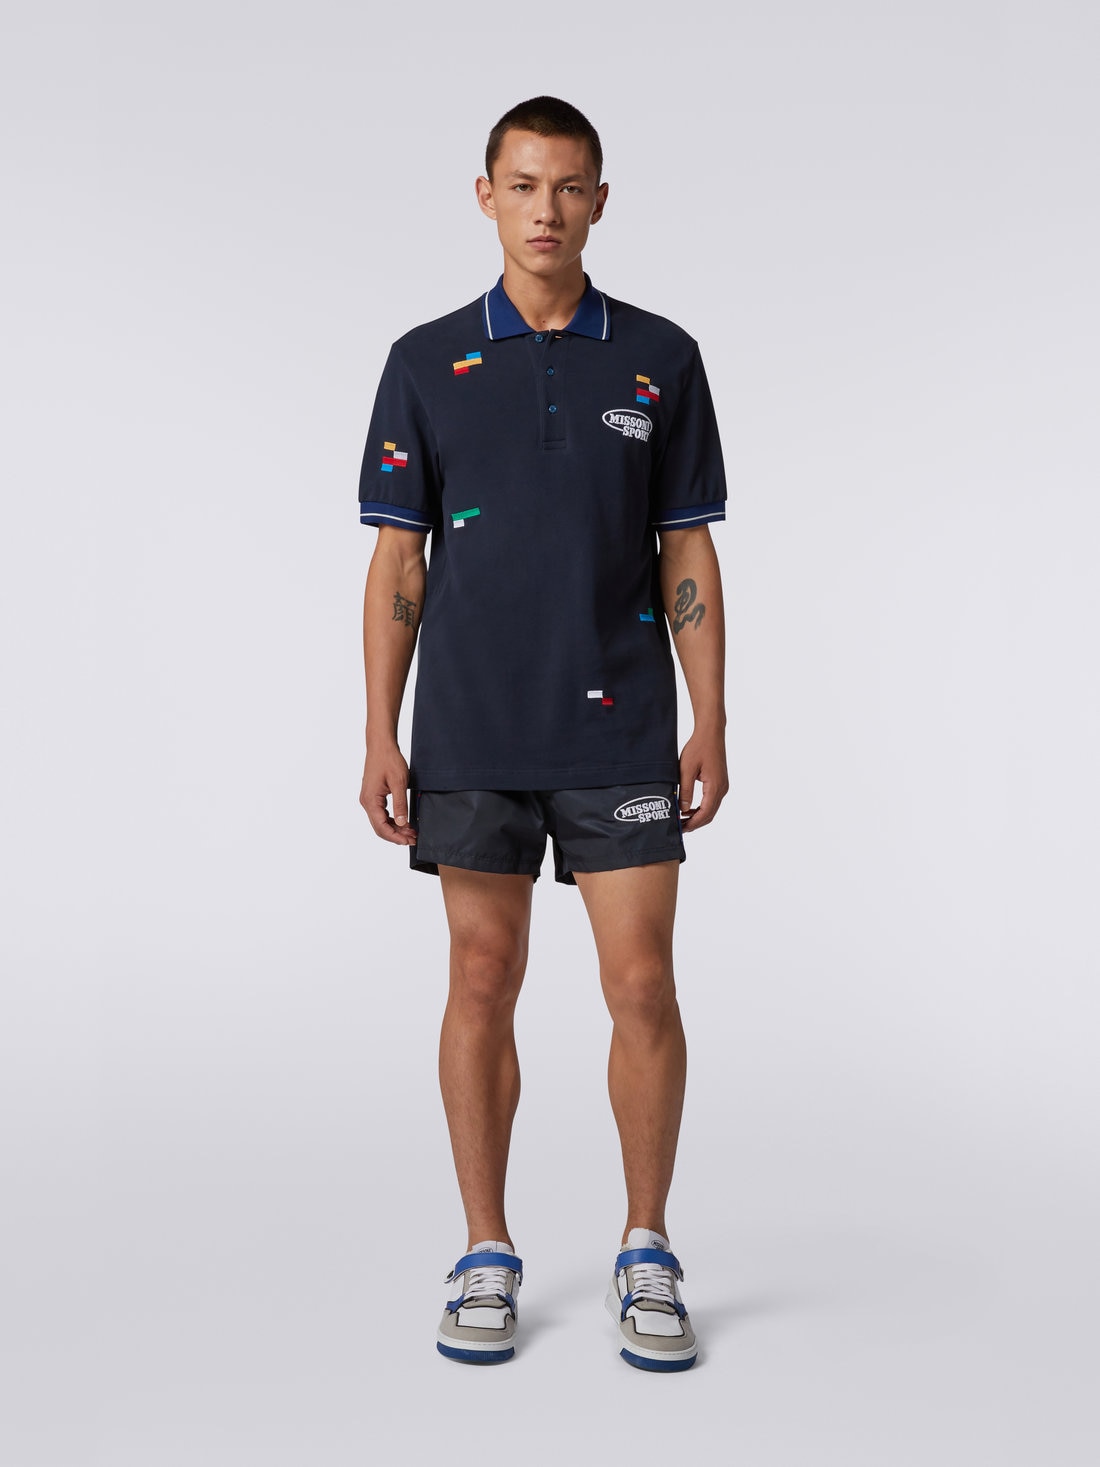 Short-sleeved polo shirt in cotton piqué with embroidered pixels, Navy Blue  - UC23S202BJ00EFS729I - 1